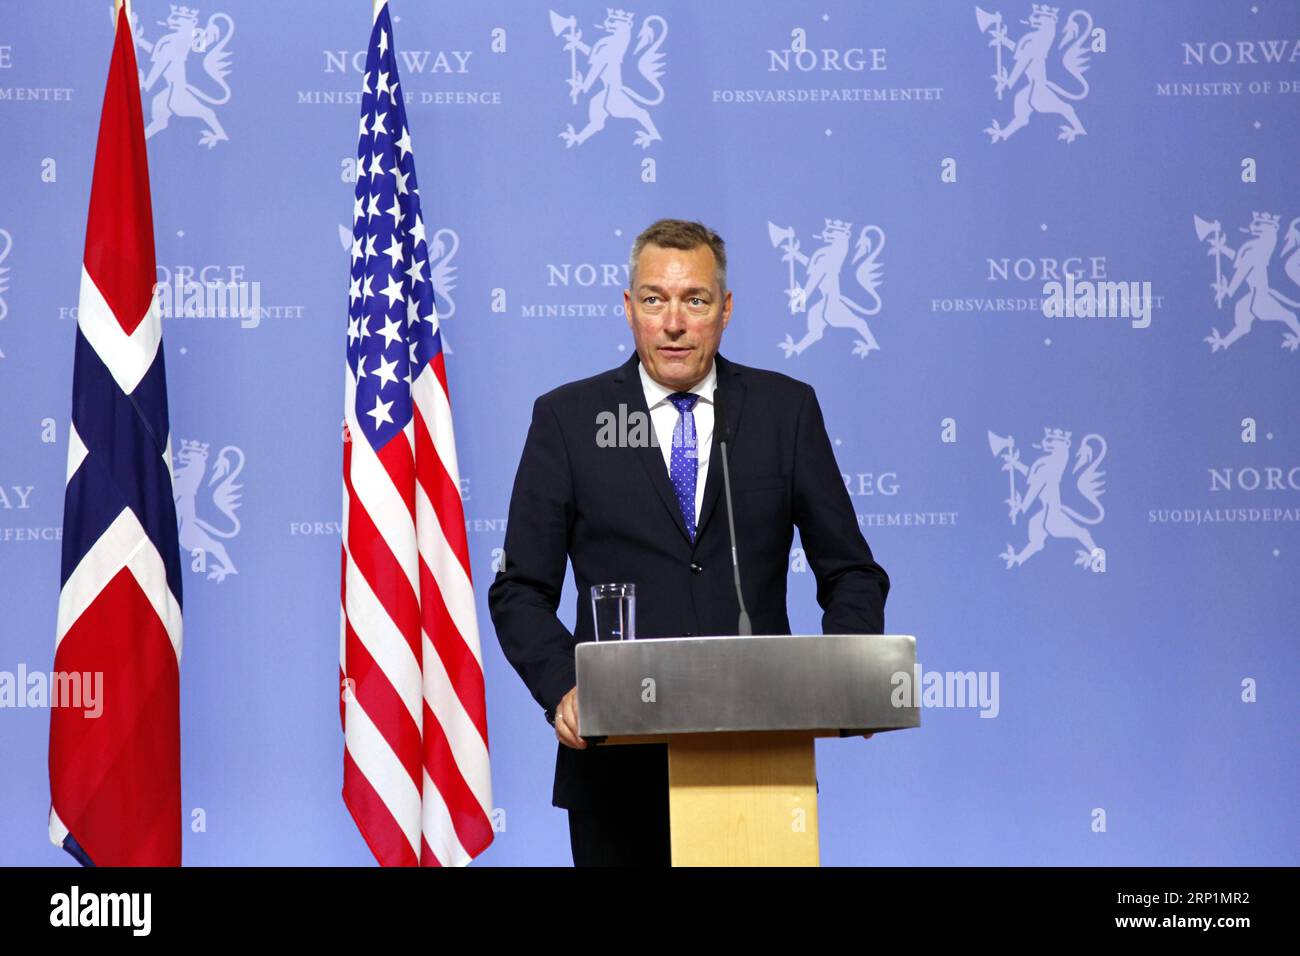 (180714) -- OSLO, July 14, 2018 -- Norwegian Minister of Defence Frank Bakke-Jensen attends a joint press conference with U.S. Secretary of Defense James Mattis (not seen in picture) in Oslo, Norway, July 14, 2018. Norway on Saturday reconfirmed its commitment to gradually increase defense spending to two percent of GDP in the North Atlantic Treaty Organization (NATO) during a visit by U.S. Secretary of Defense James Mattis to the Nordic country. ) NORWAY-OSLO-U.S.-DEFENSE MINISTER-VISIT LiangxYouchang PUBLICATIONxNOTxINxCHN Stock Photo